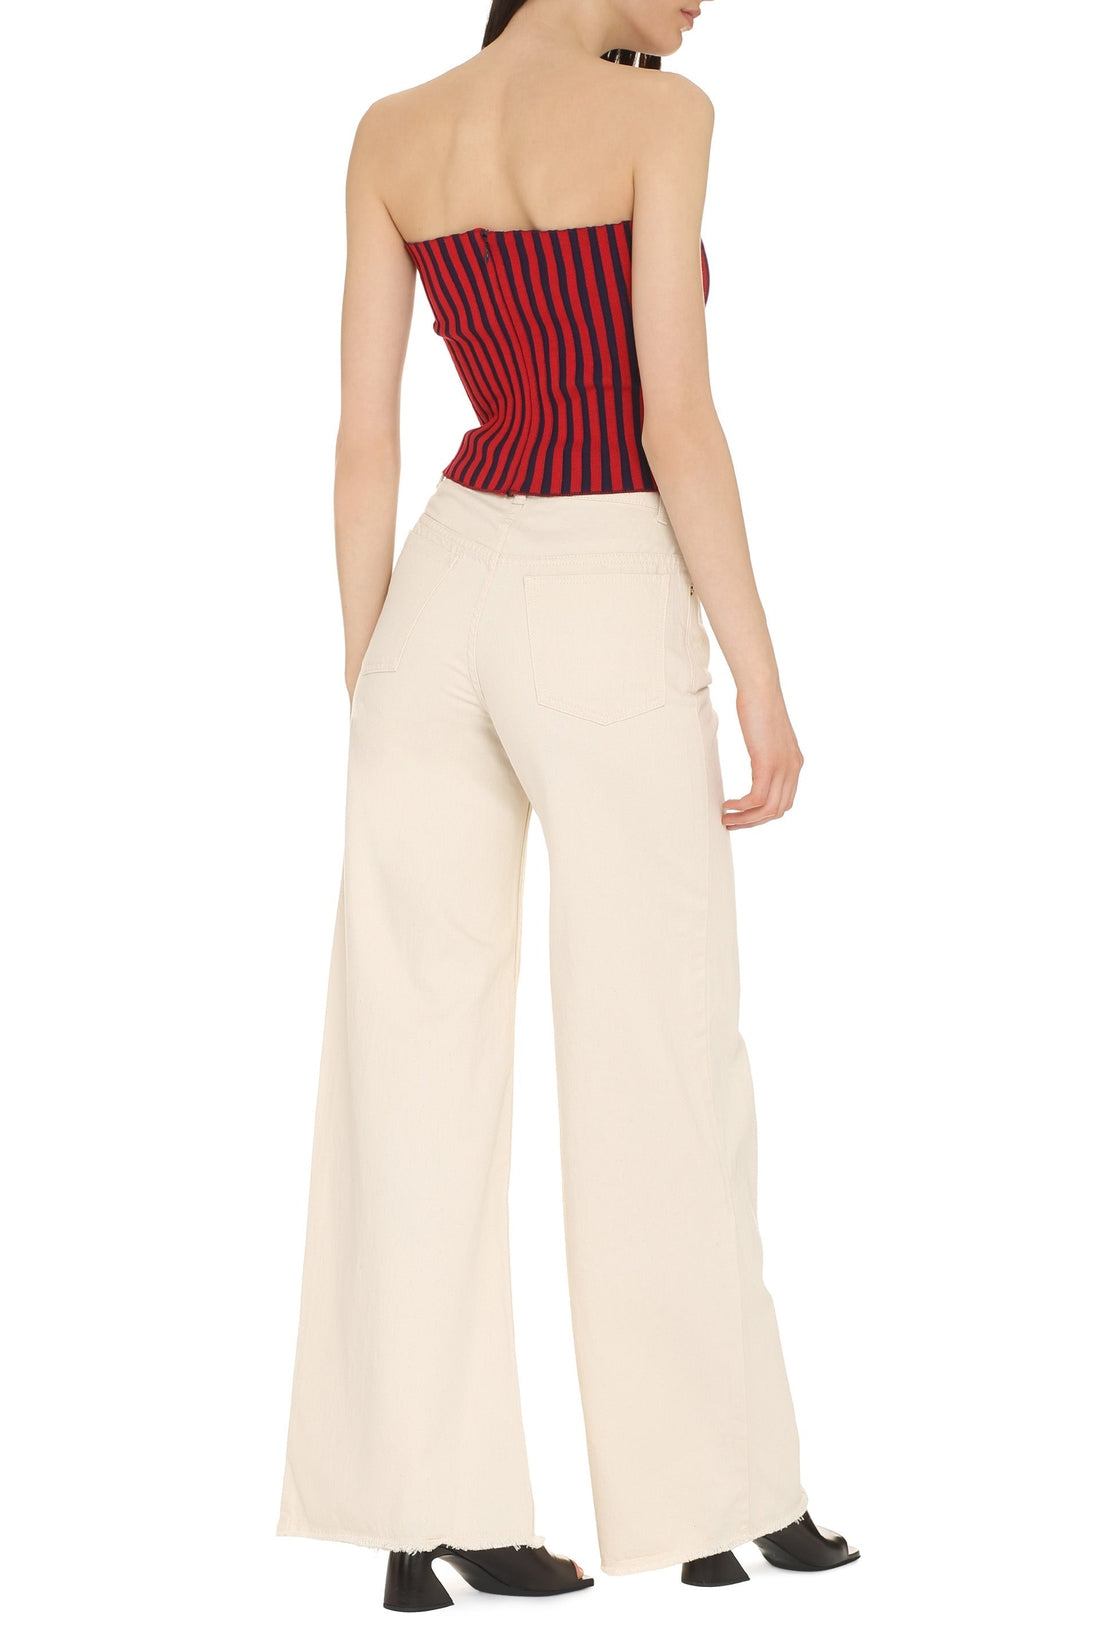 Tory Burch-OUTLET-SALE-Ribbed knit top-ARCHIVIST